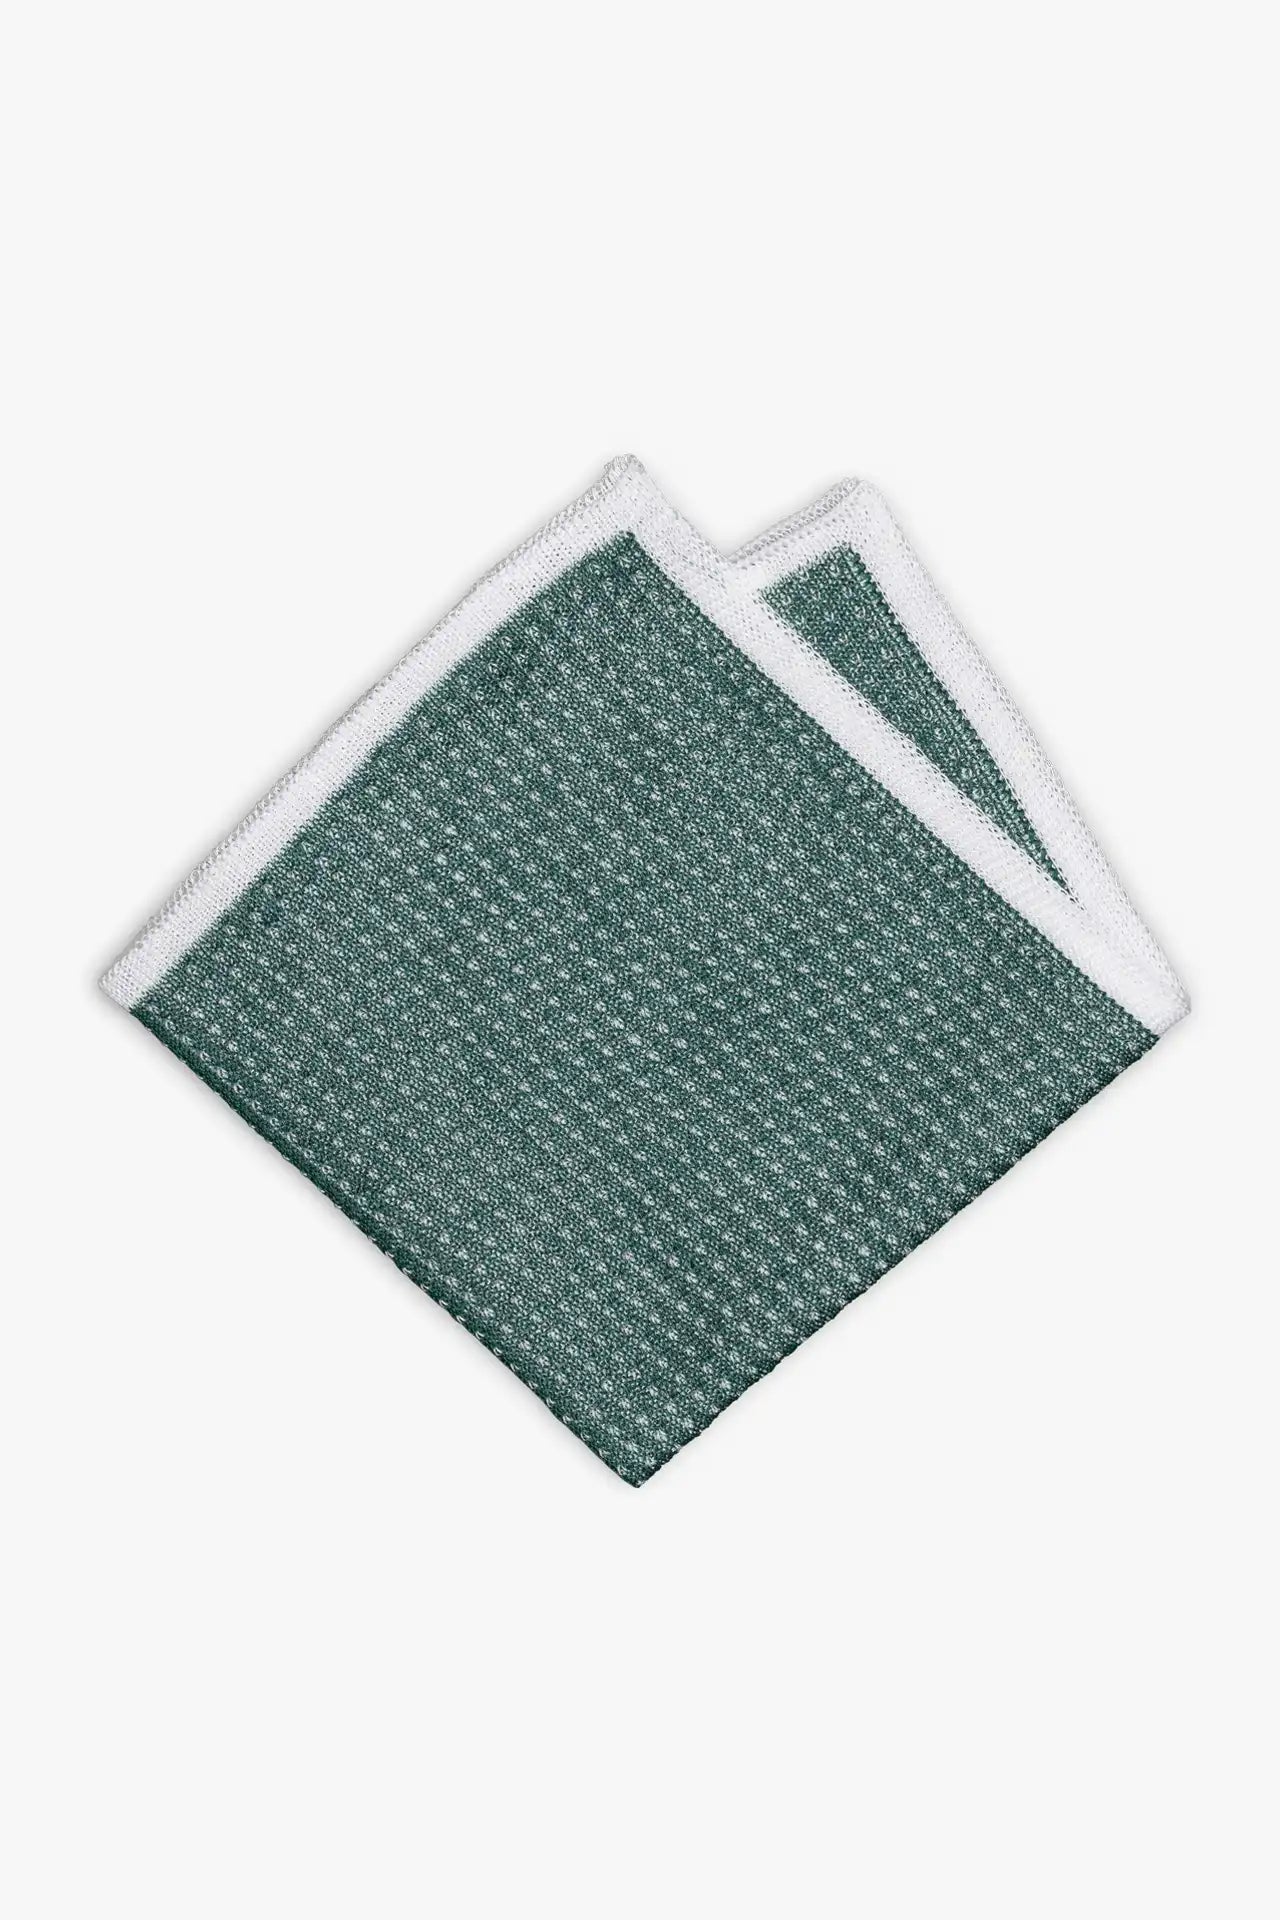 Green and white knitted pocket square with white boarder in cotton 